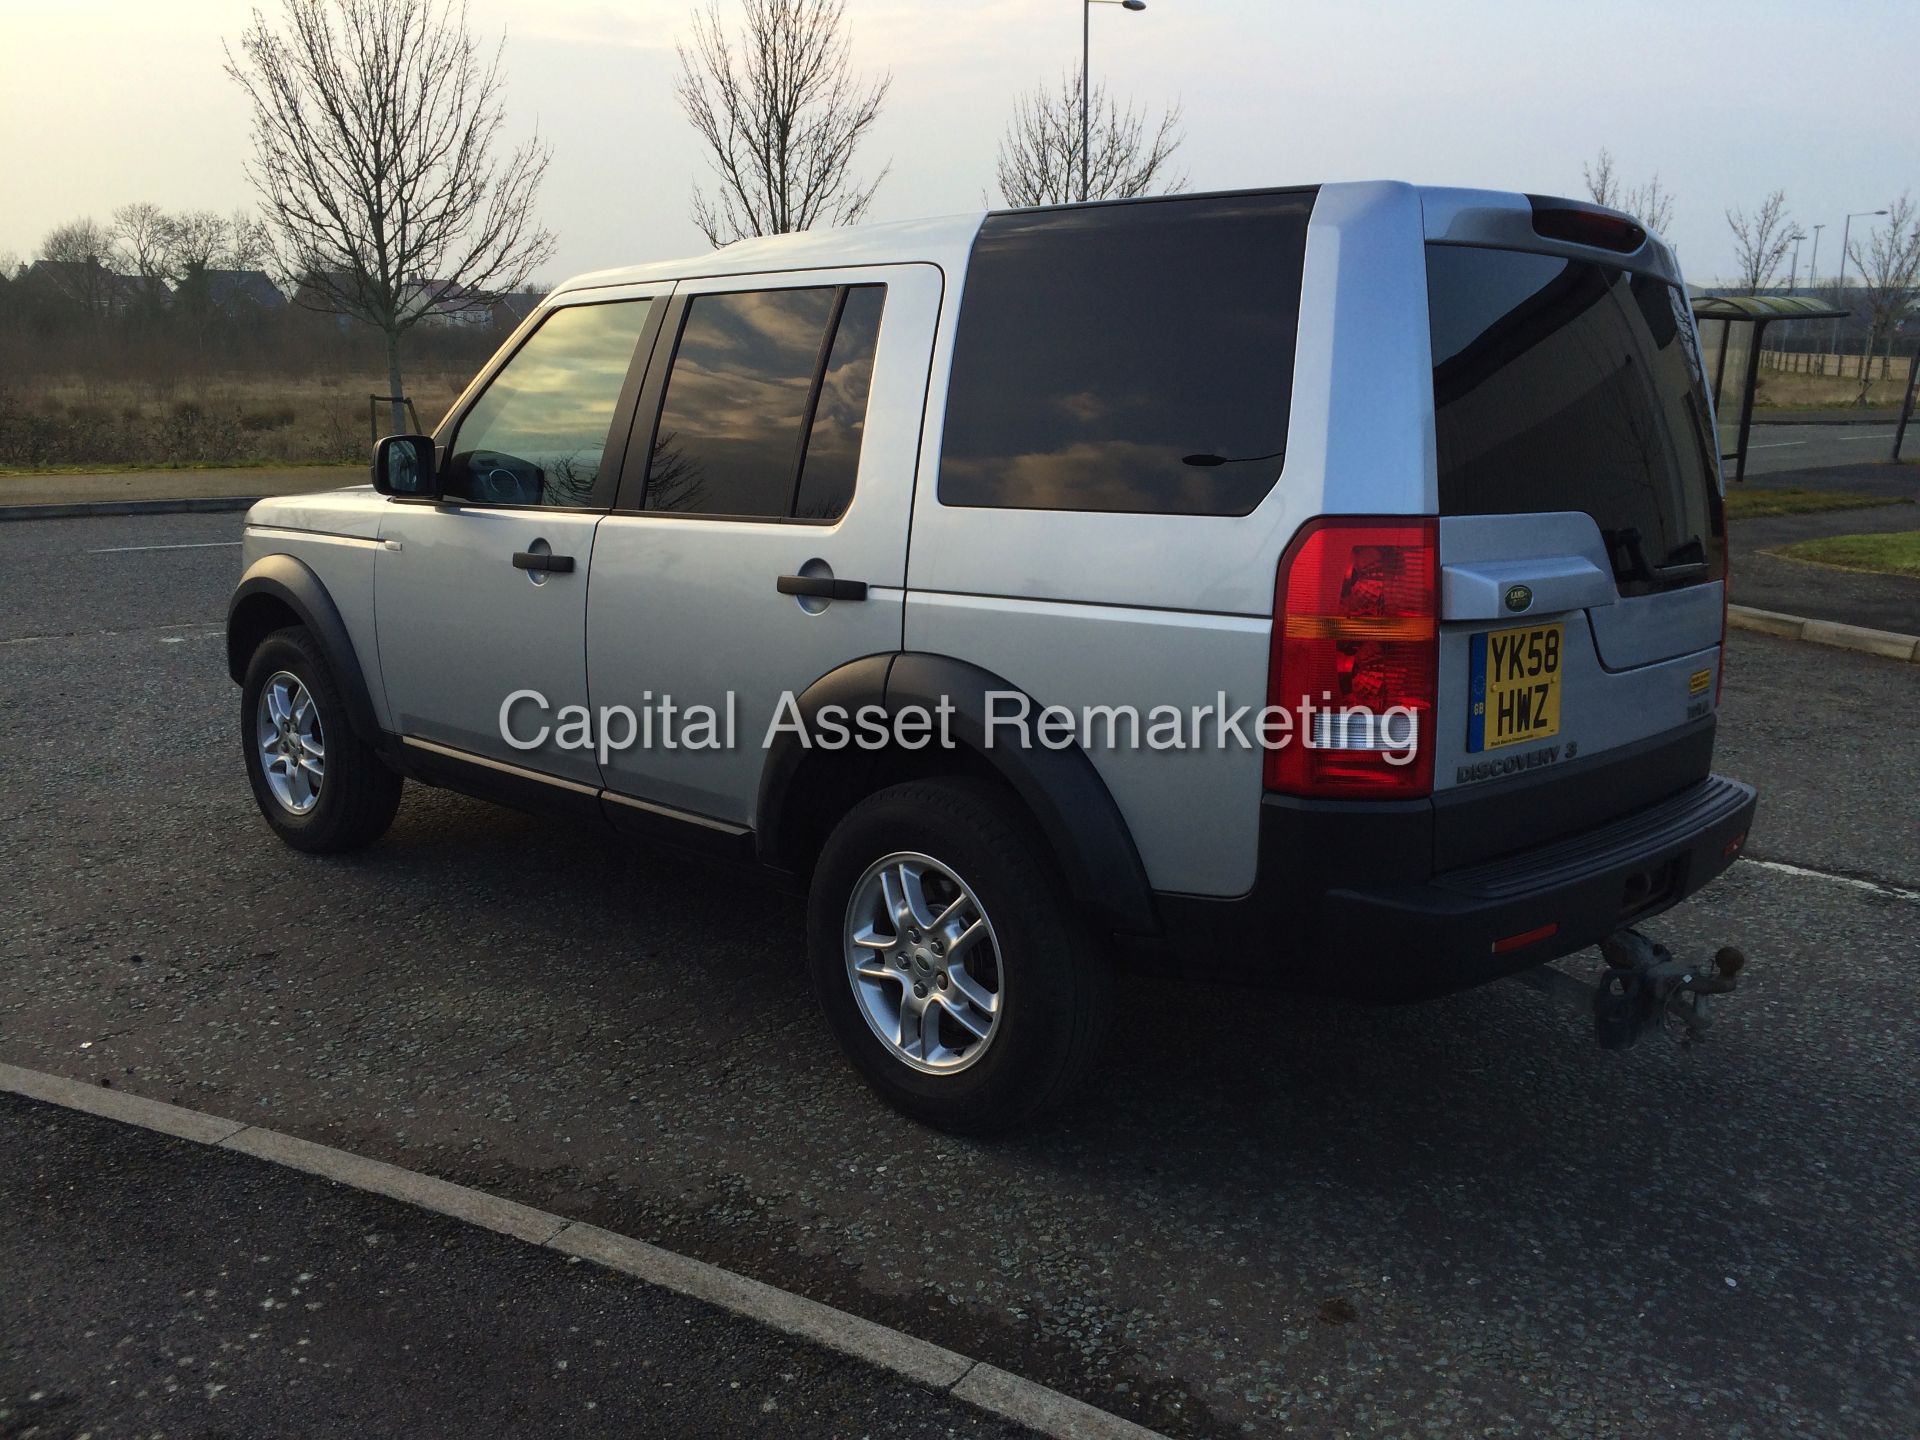 LANDROVER DISCOVERY 3 "TDV6" AUTOMATIC - 1 PREVIOUS OWNER FROM NEW - AIR SUSPENSION - PRIVACY GLASS! - Image 3 of 18